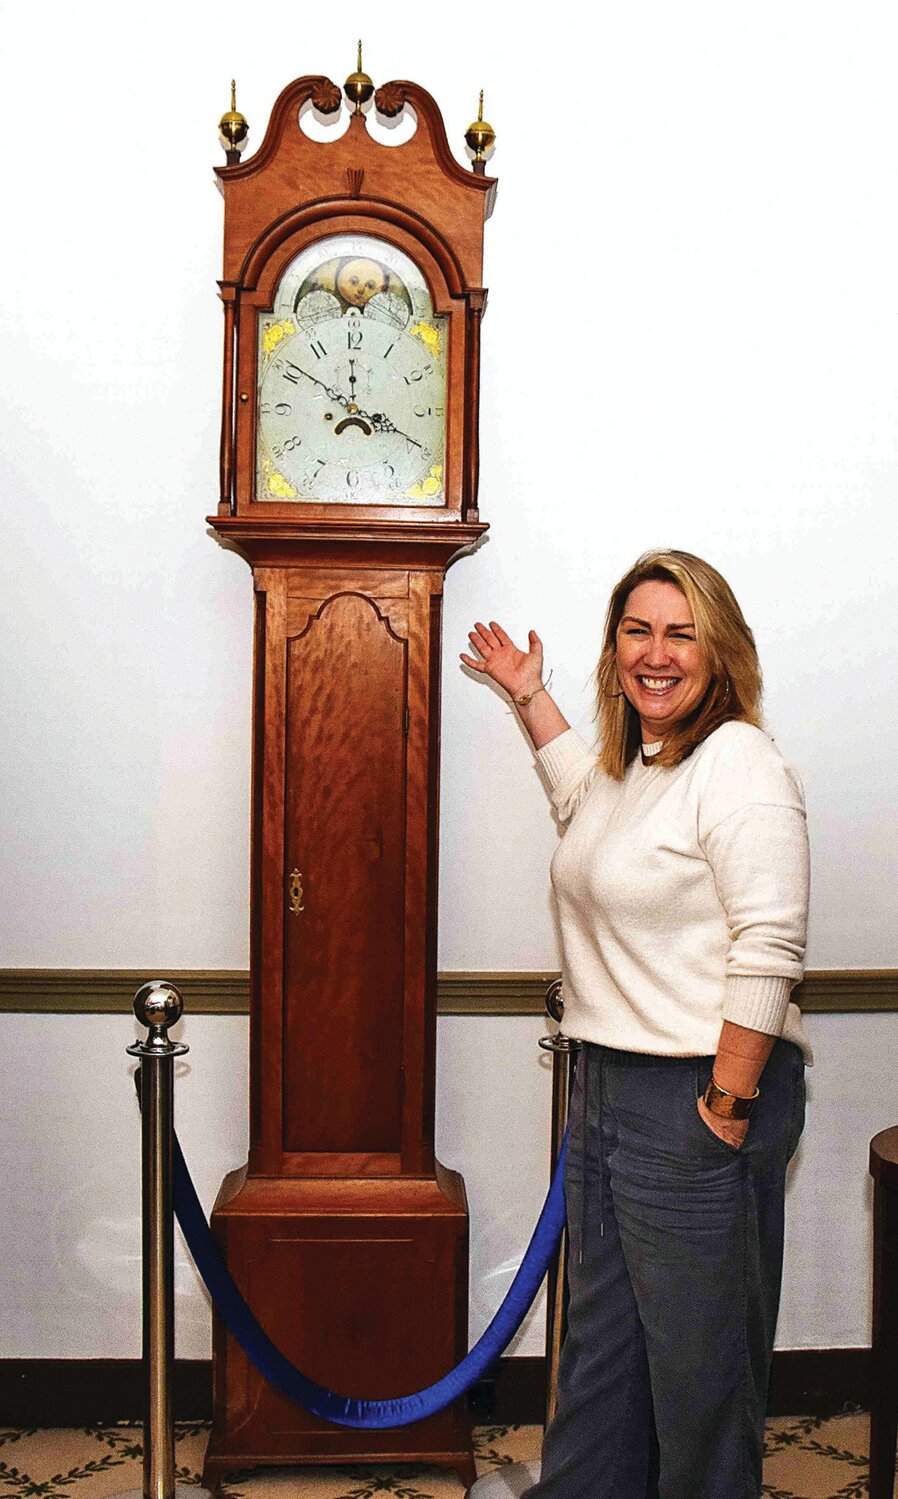 Kirsten Bronkovic, executive director of the New Hope Historical Society and the Parry Mansion Museum, with the restored 200-year-old Parry grandfather clock.